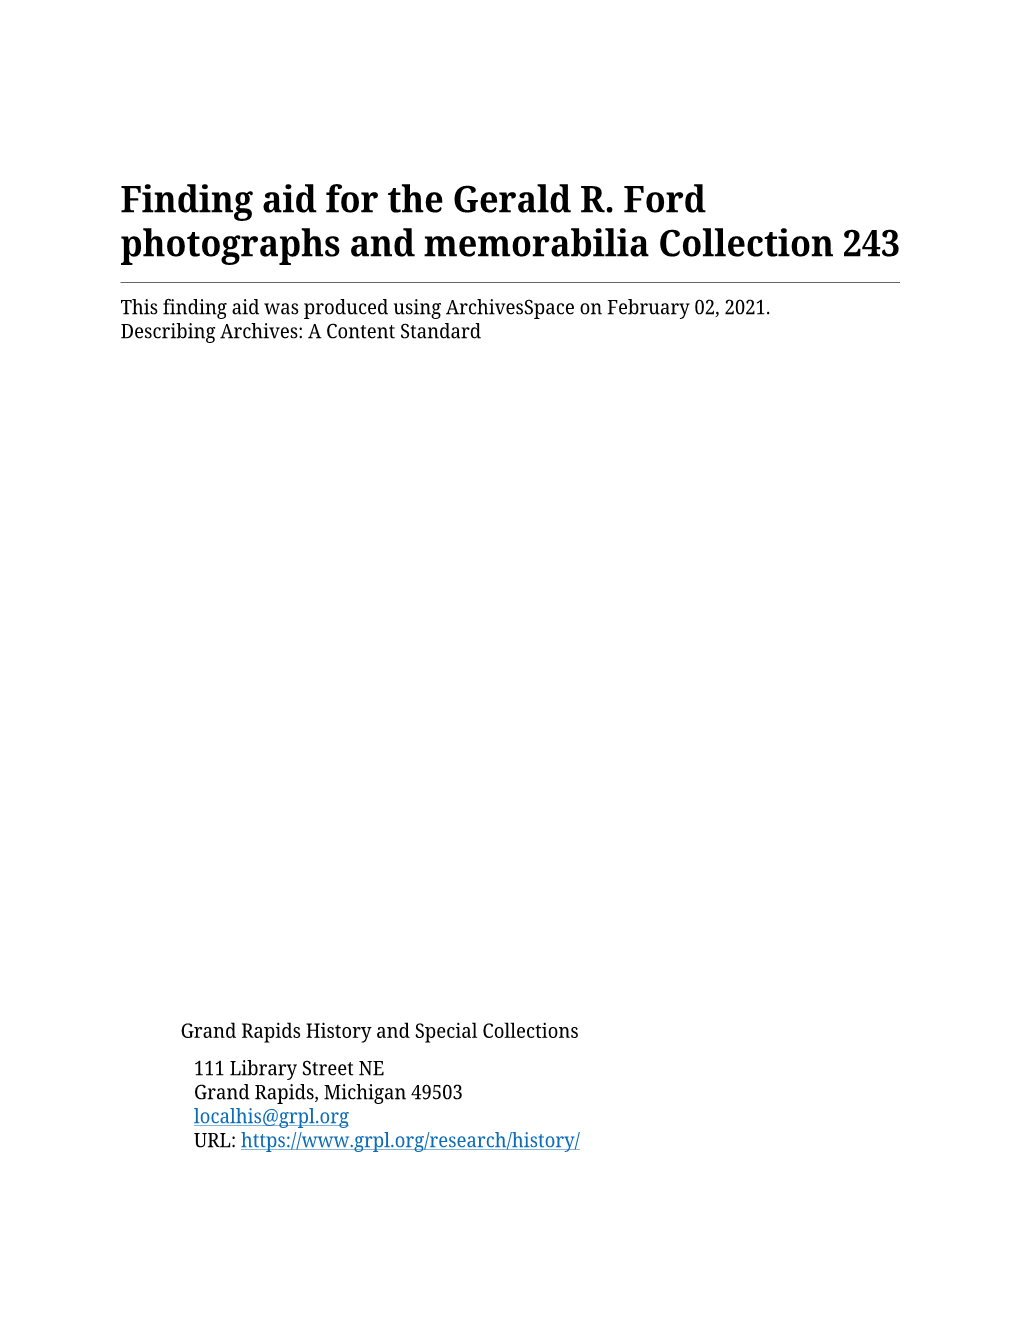 Finding Aid for the Gerald R. Ford Photographs and Memorabilia Collection 243